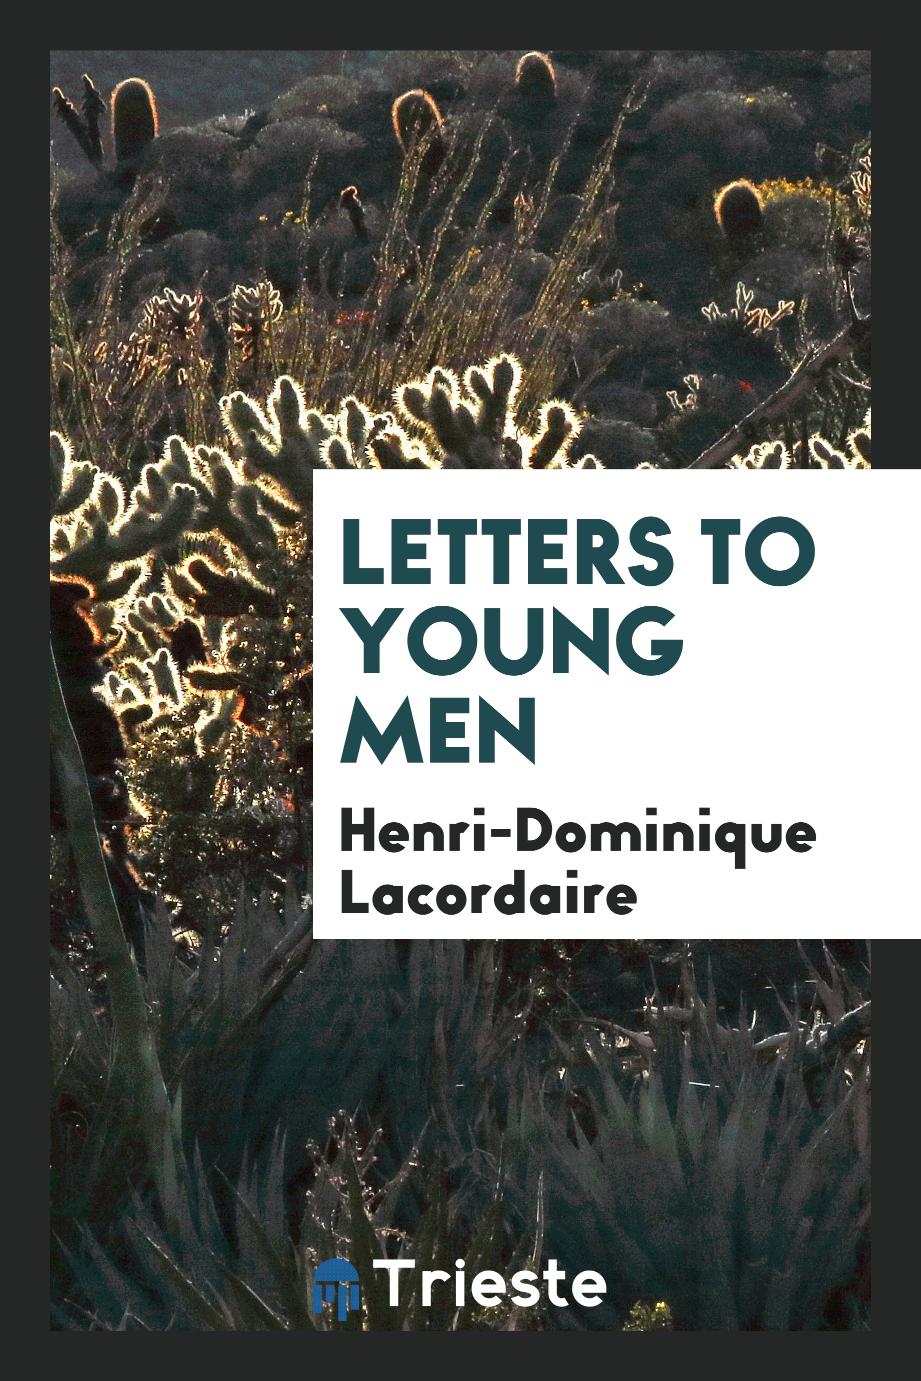 Letters to young men